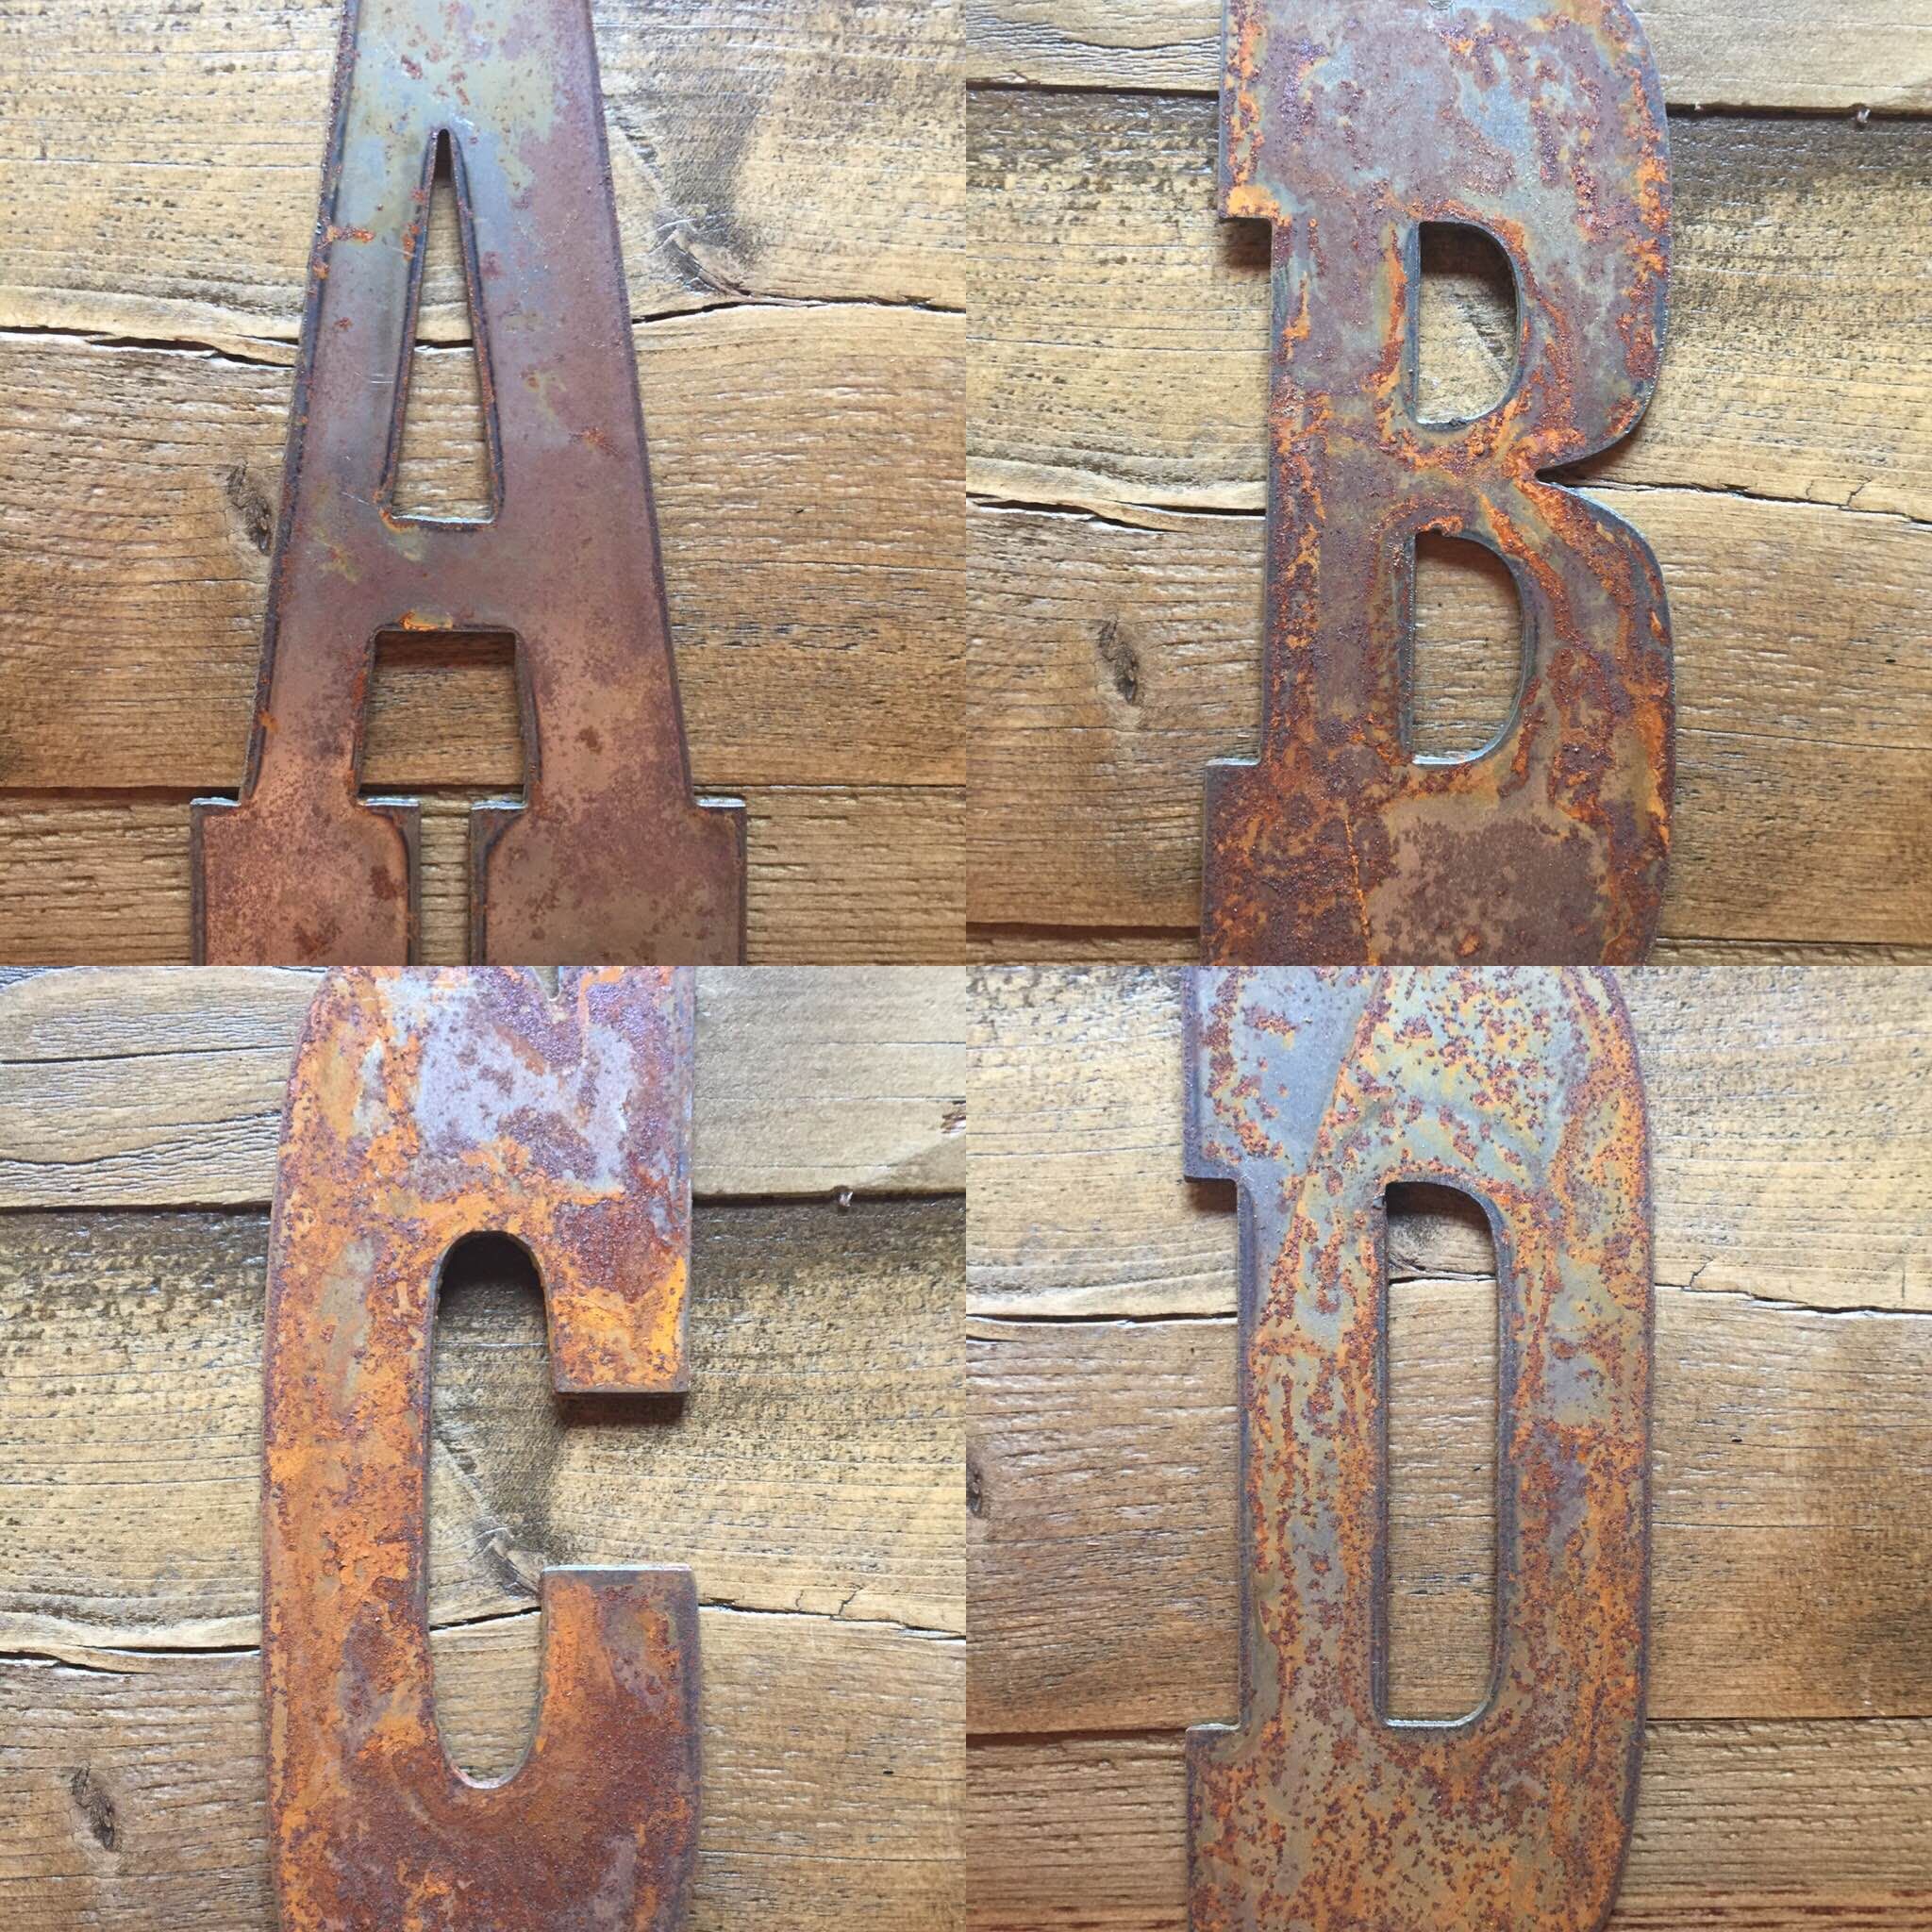 5 Inch Metal Letters and Numbers - Rusty or Natural Steel Finish - Varsity